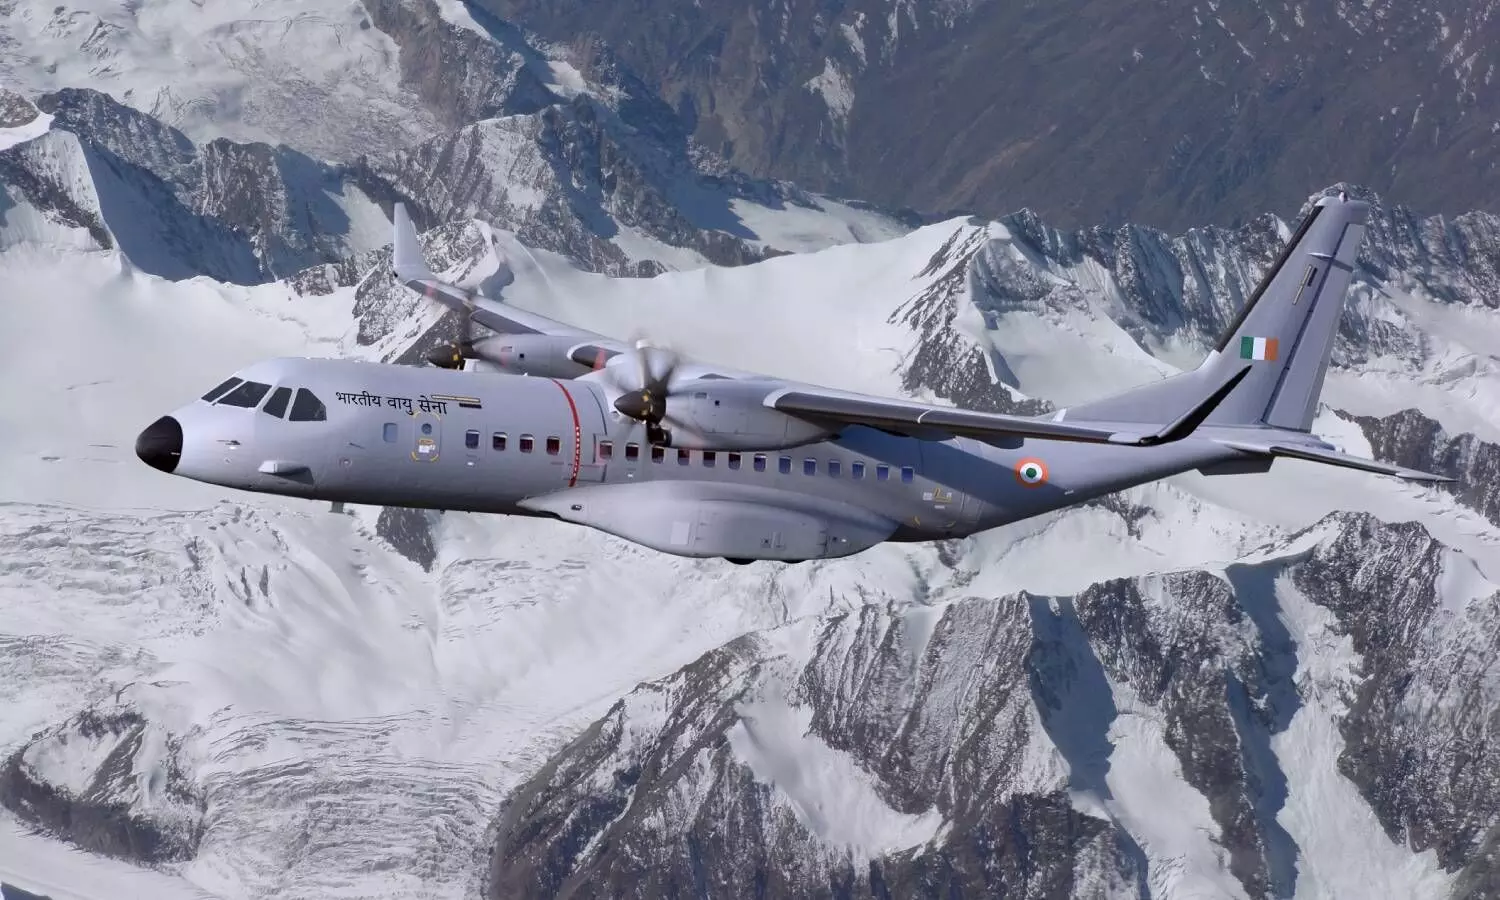 56 Airbus C295MW aircraft to replace IAF’s Avro fleet